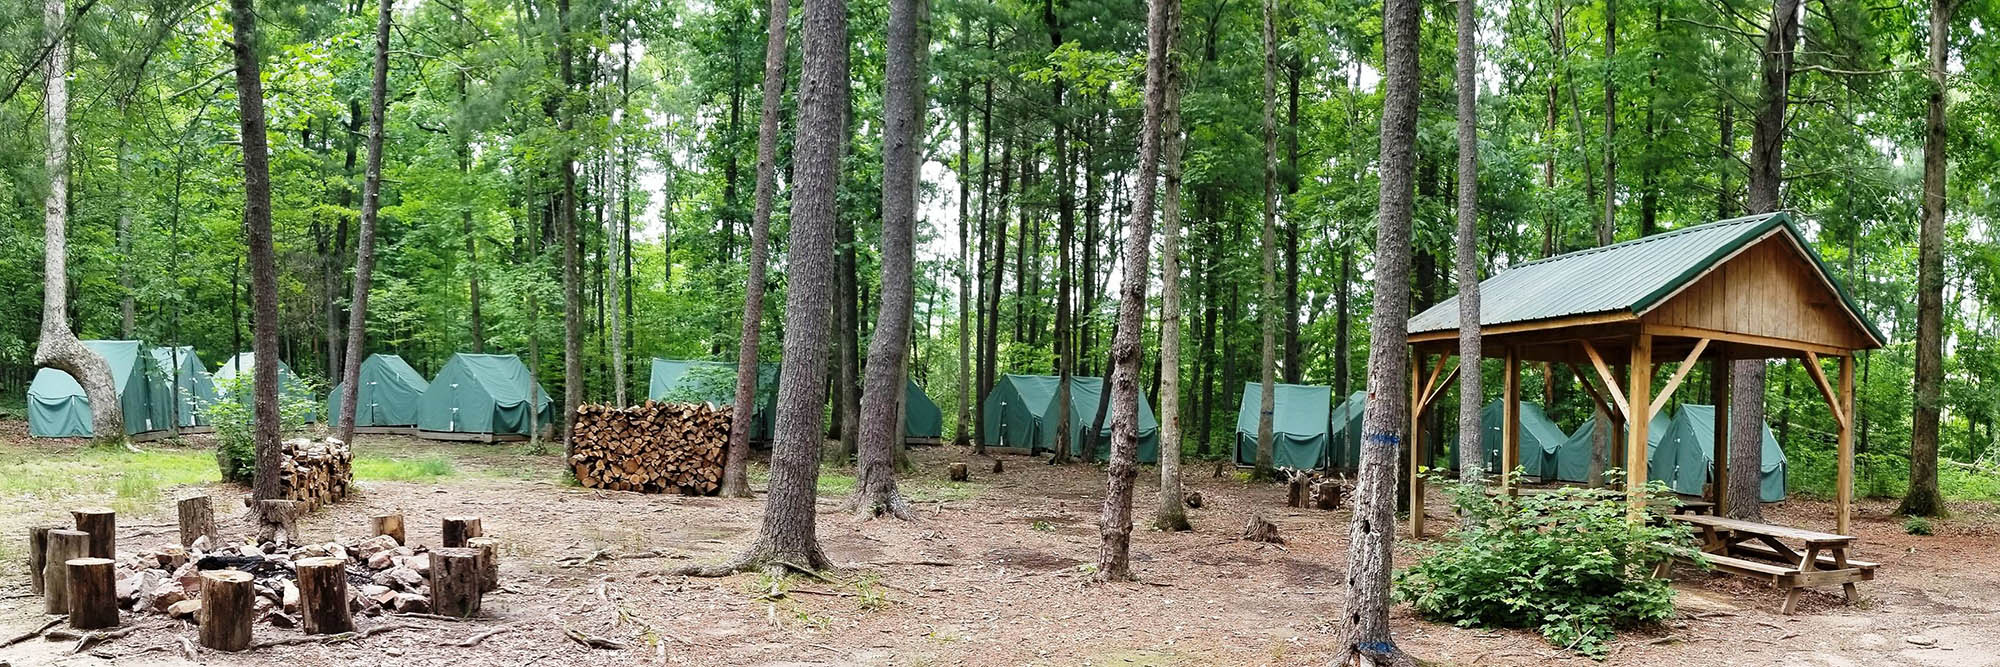 A typical campsite at Camp Shenandoah, with a fire ring, a covered picnic table, and a group of canvas tents